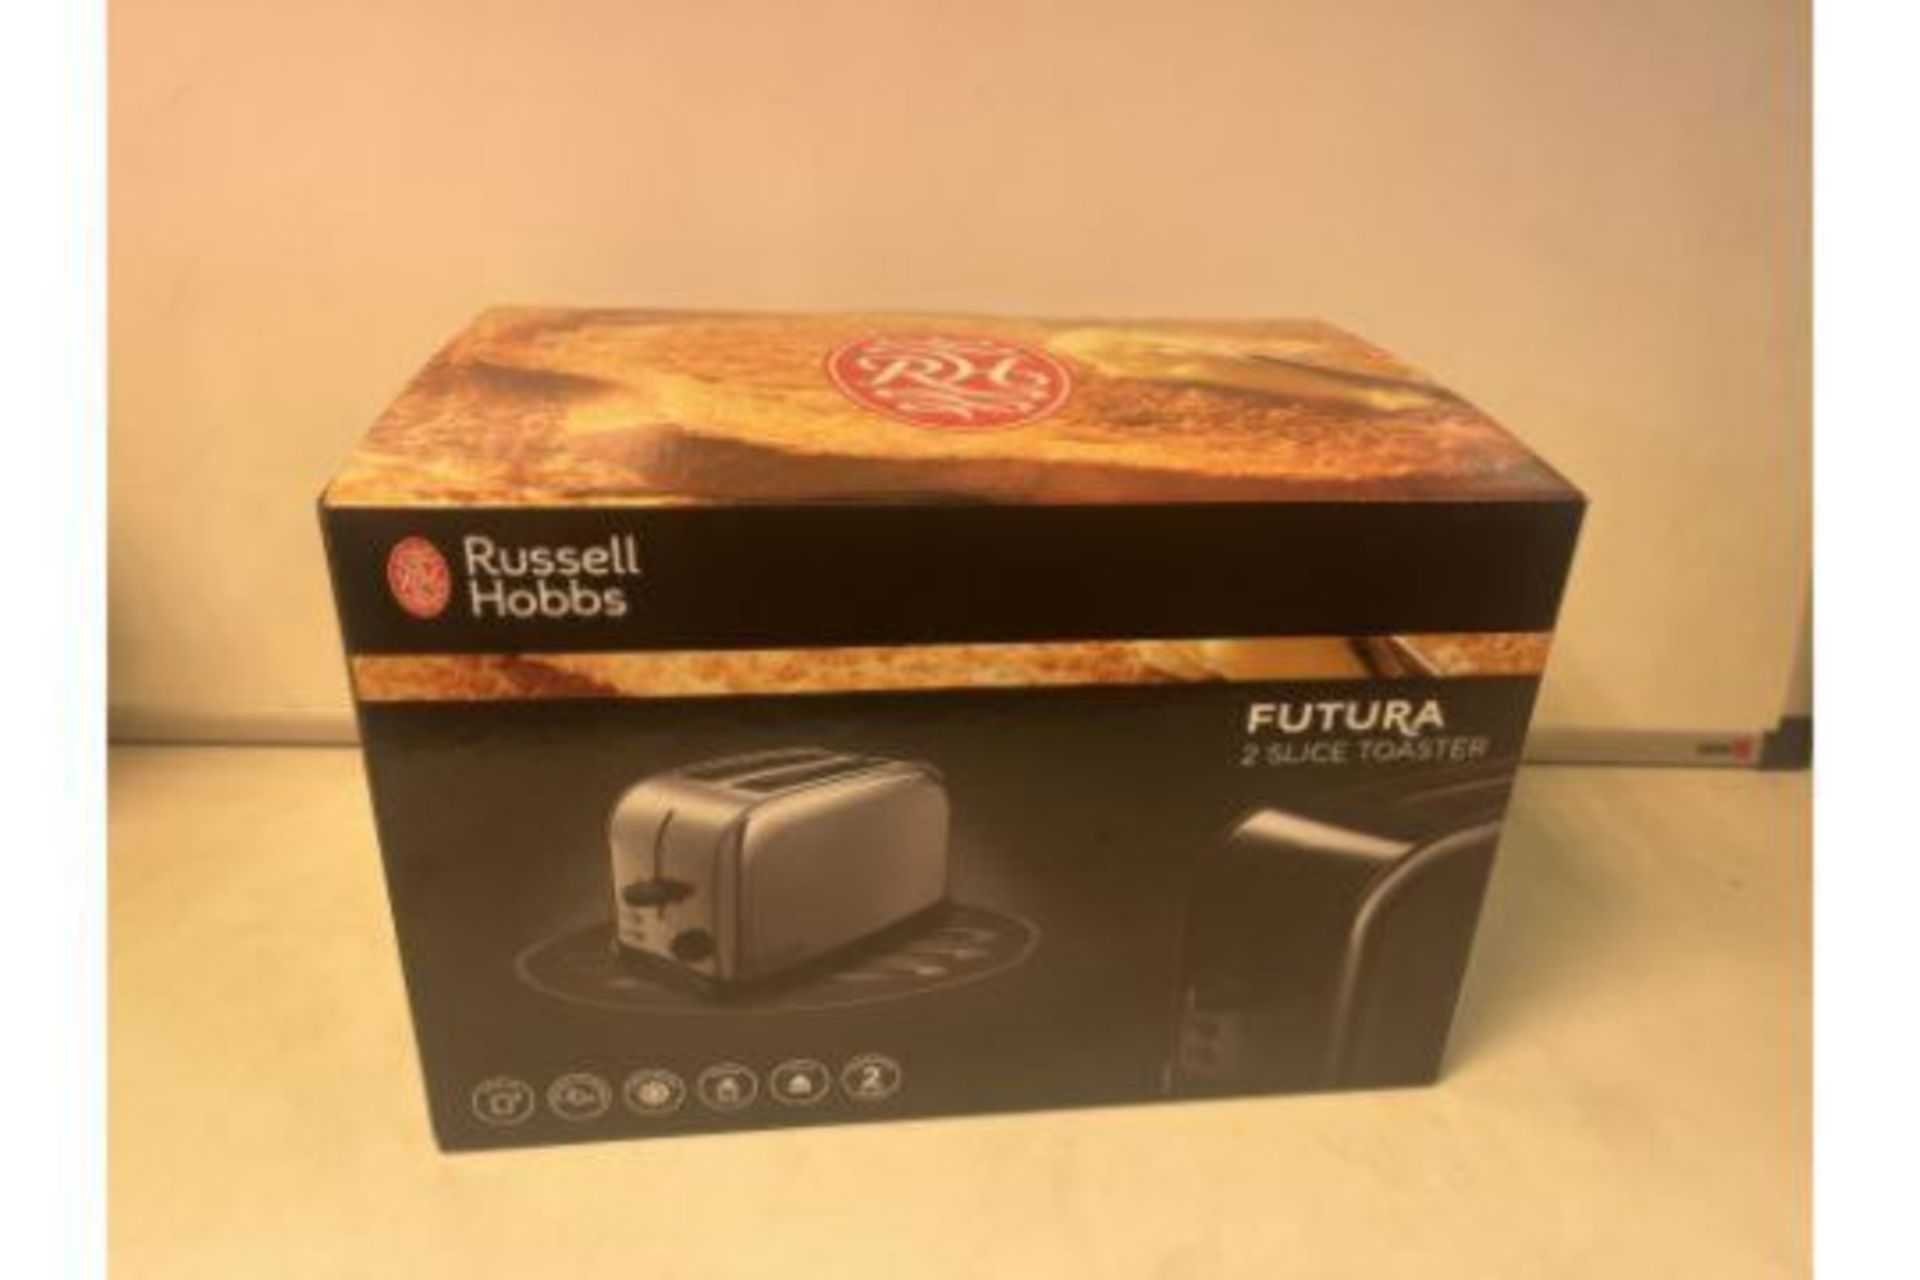 3 X BRAND NEW RISSELL HOBBS FUTURA 2 SLICE TOASTERS RRP £40 EACH R10/11